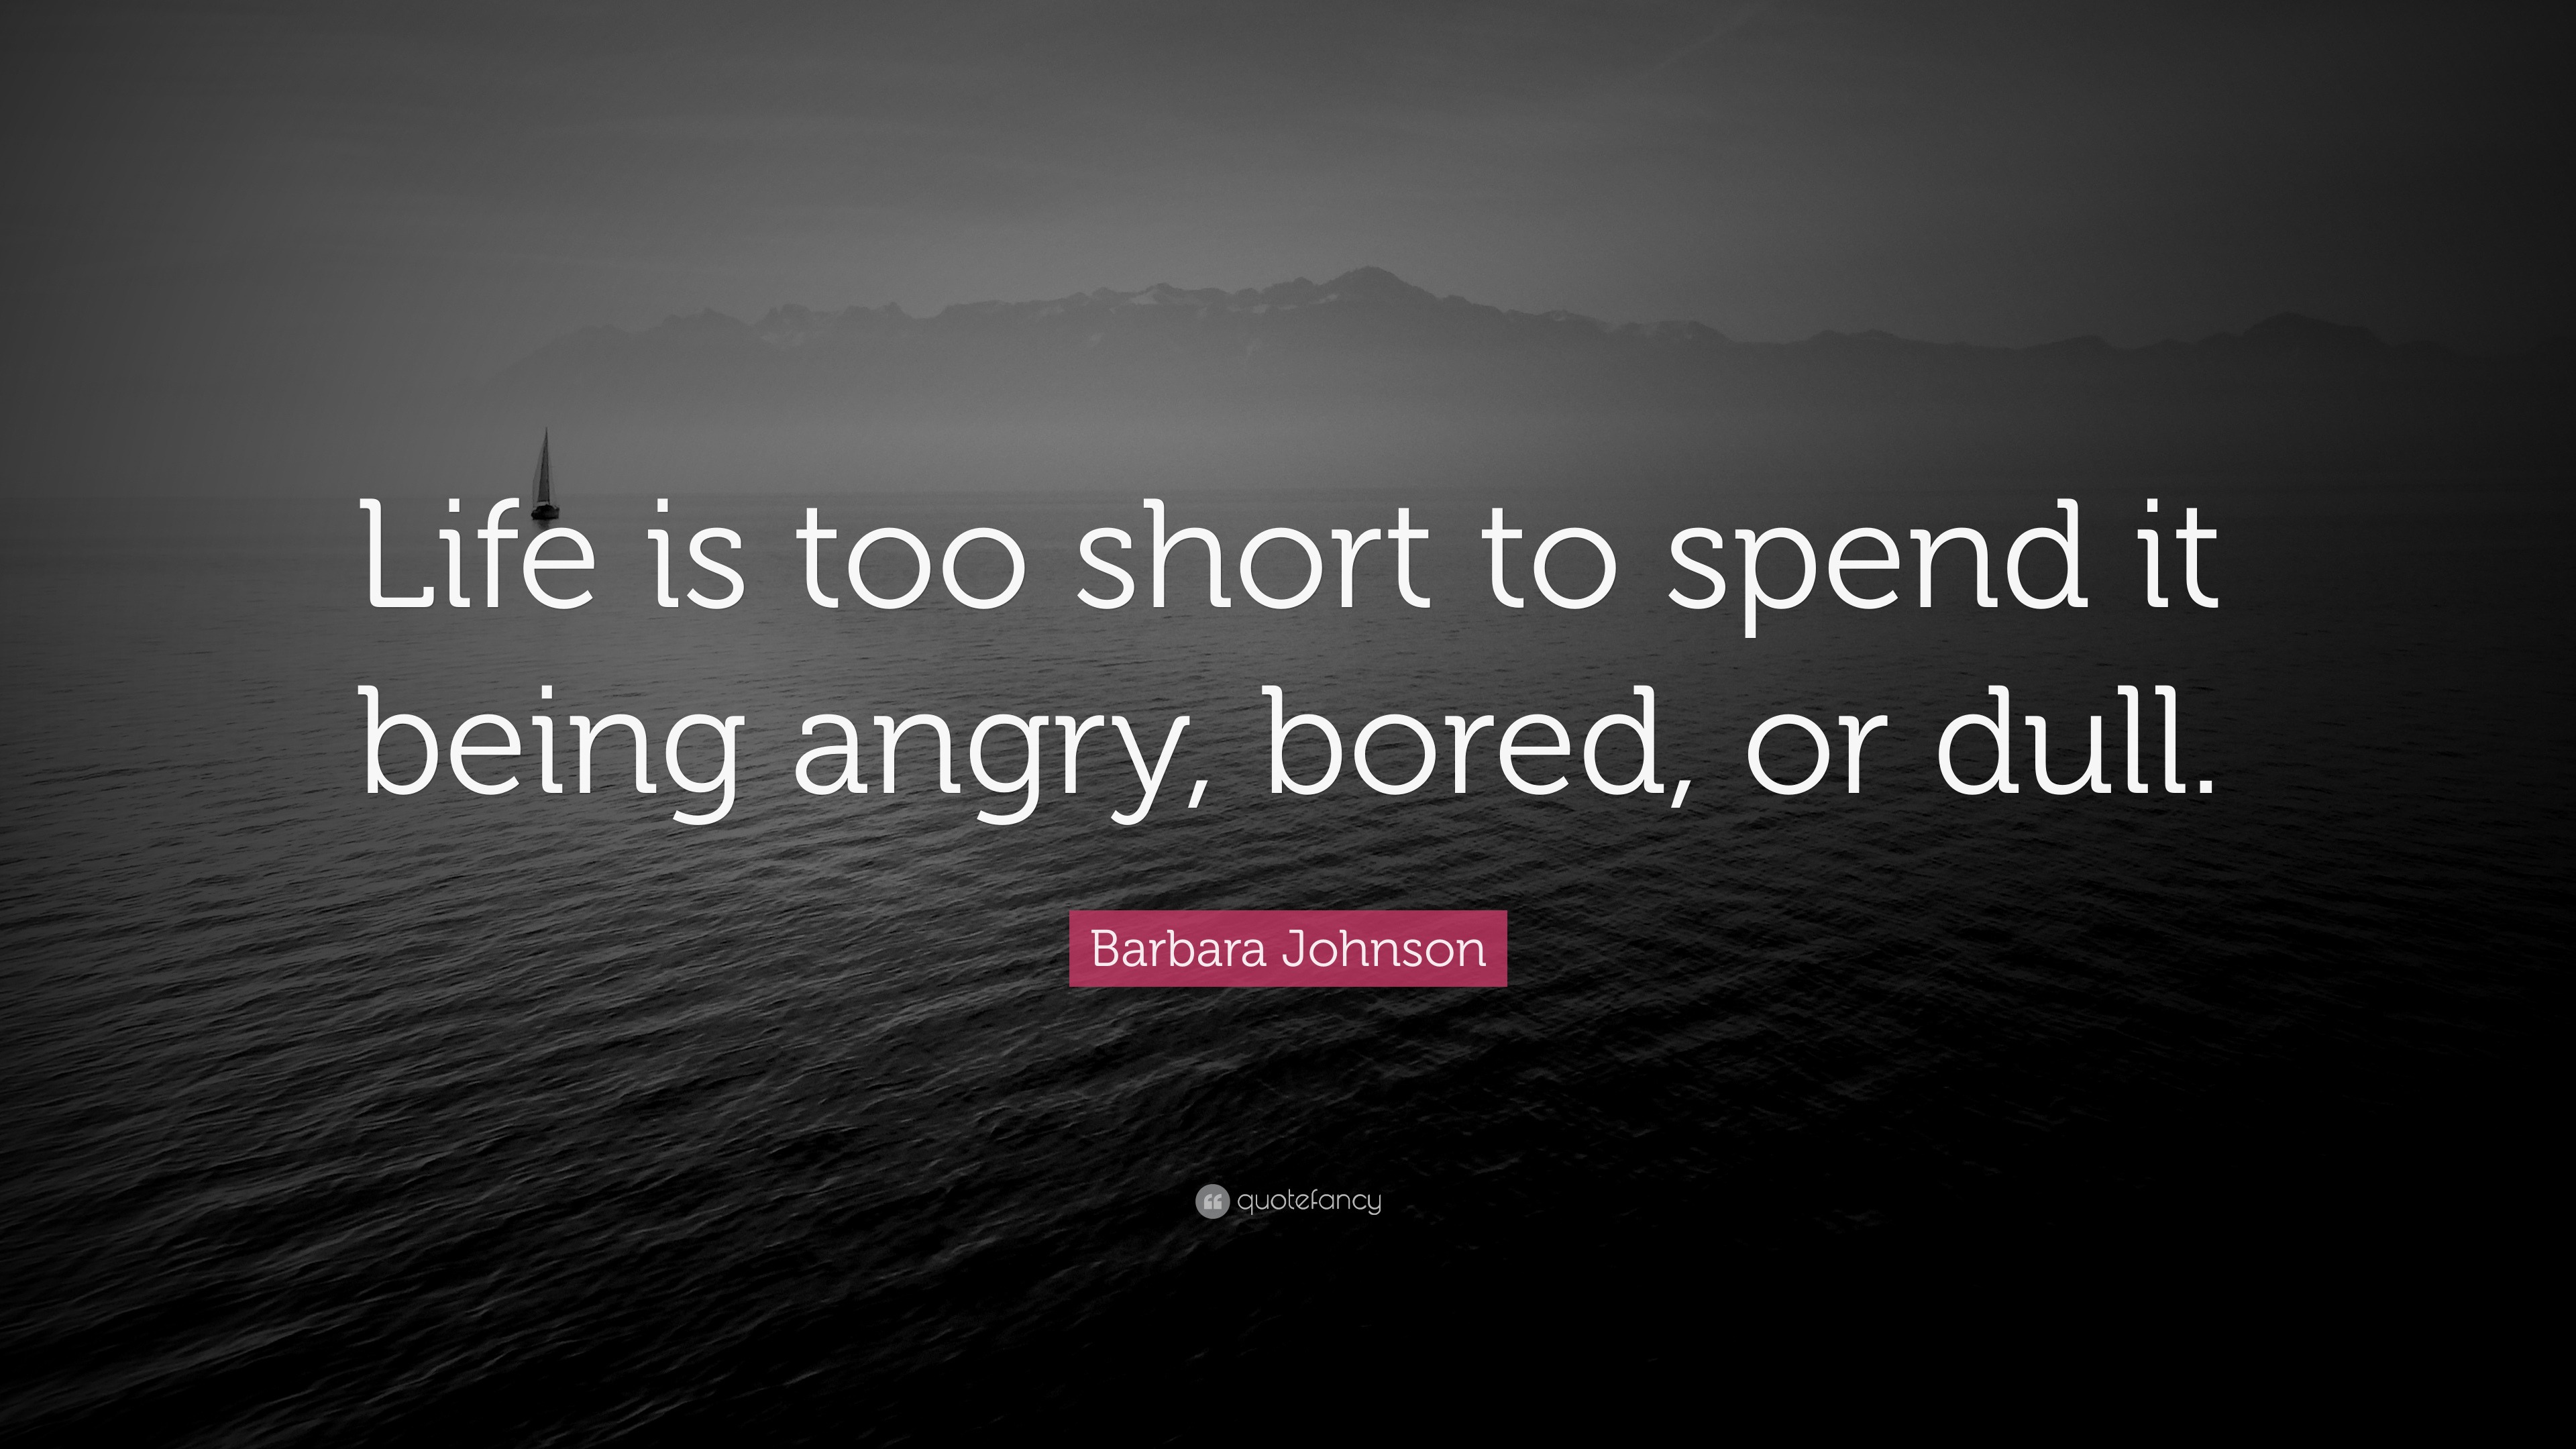 Lovely Angry Life Quotes and Sayings | Inspiring Famous Quotes about